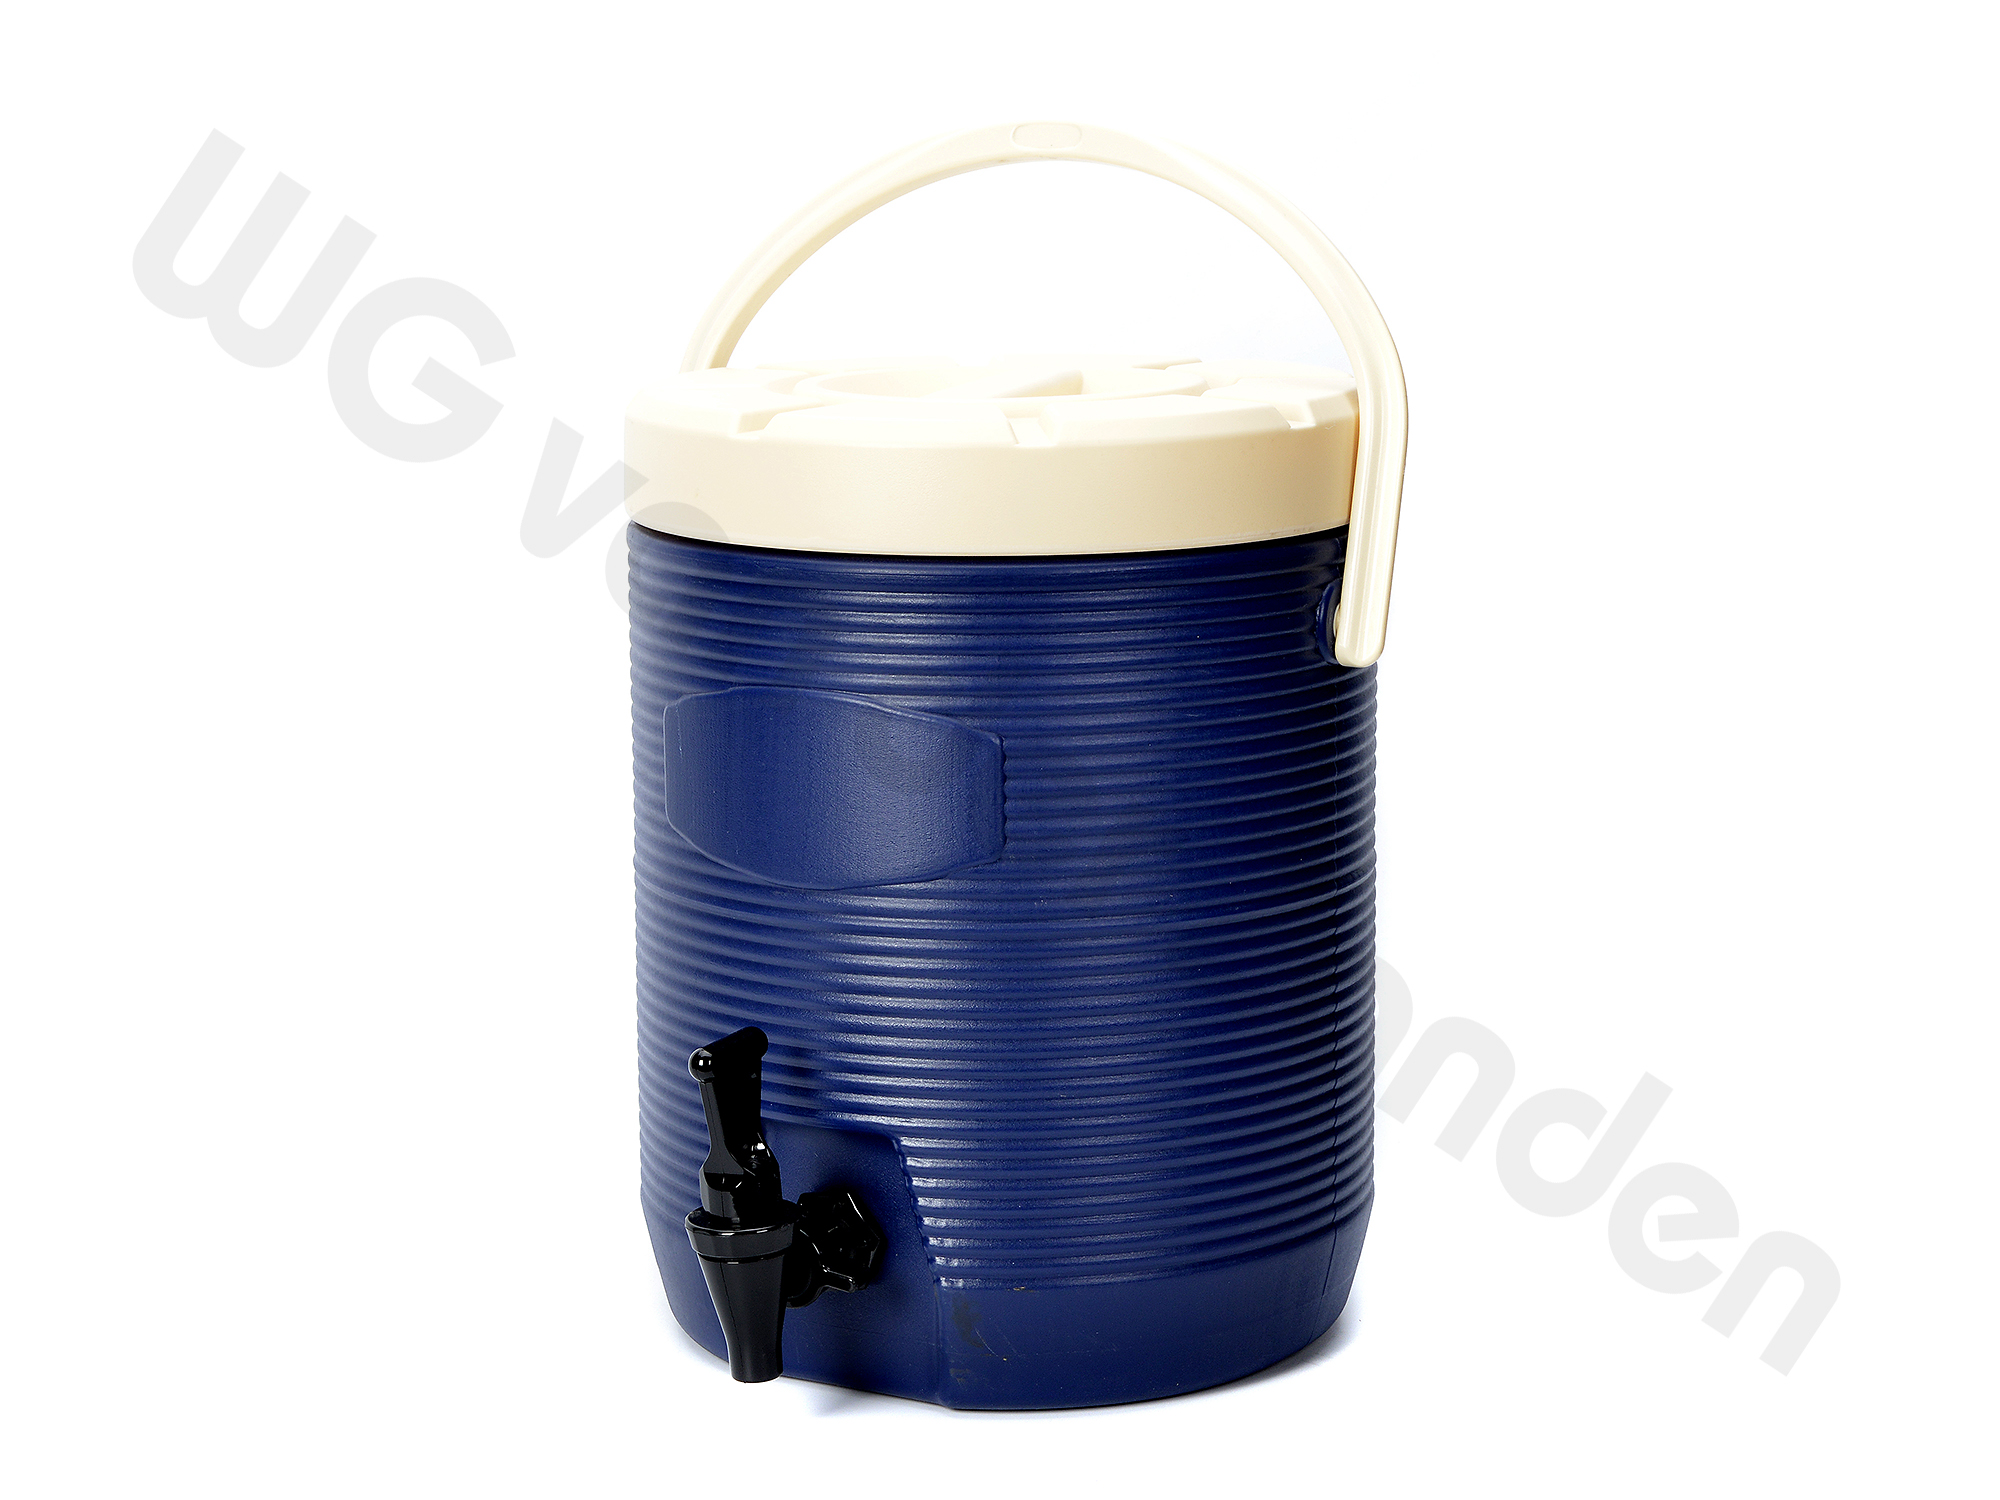 441850 THERMOSCONTAINER MET KRAAN 14LTR